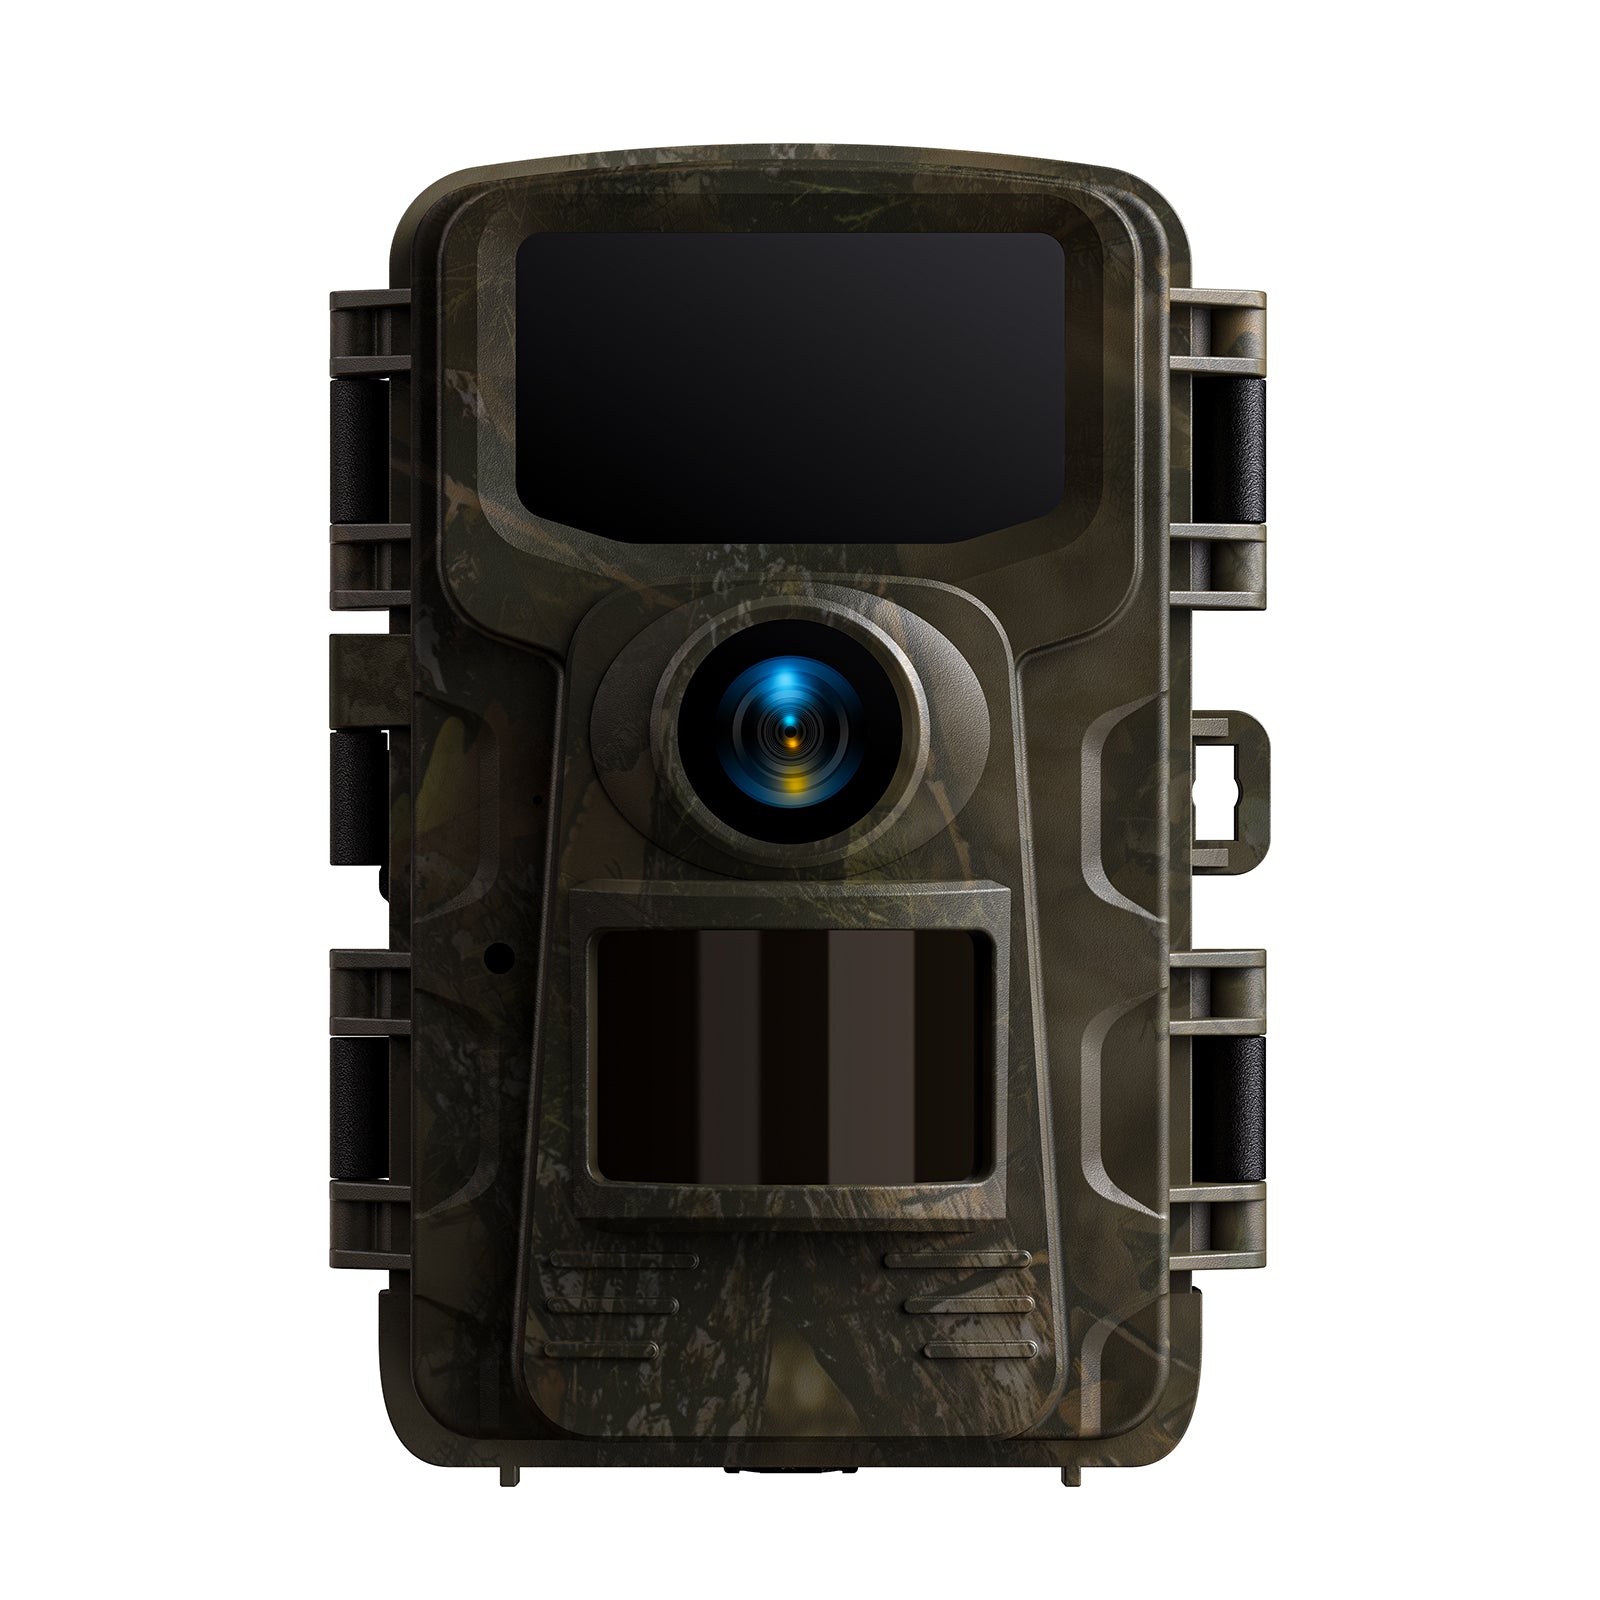 Campark TC23 Full HD 24MP Trail Camera with Night Vision